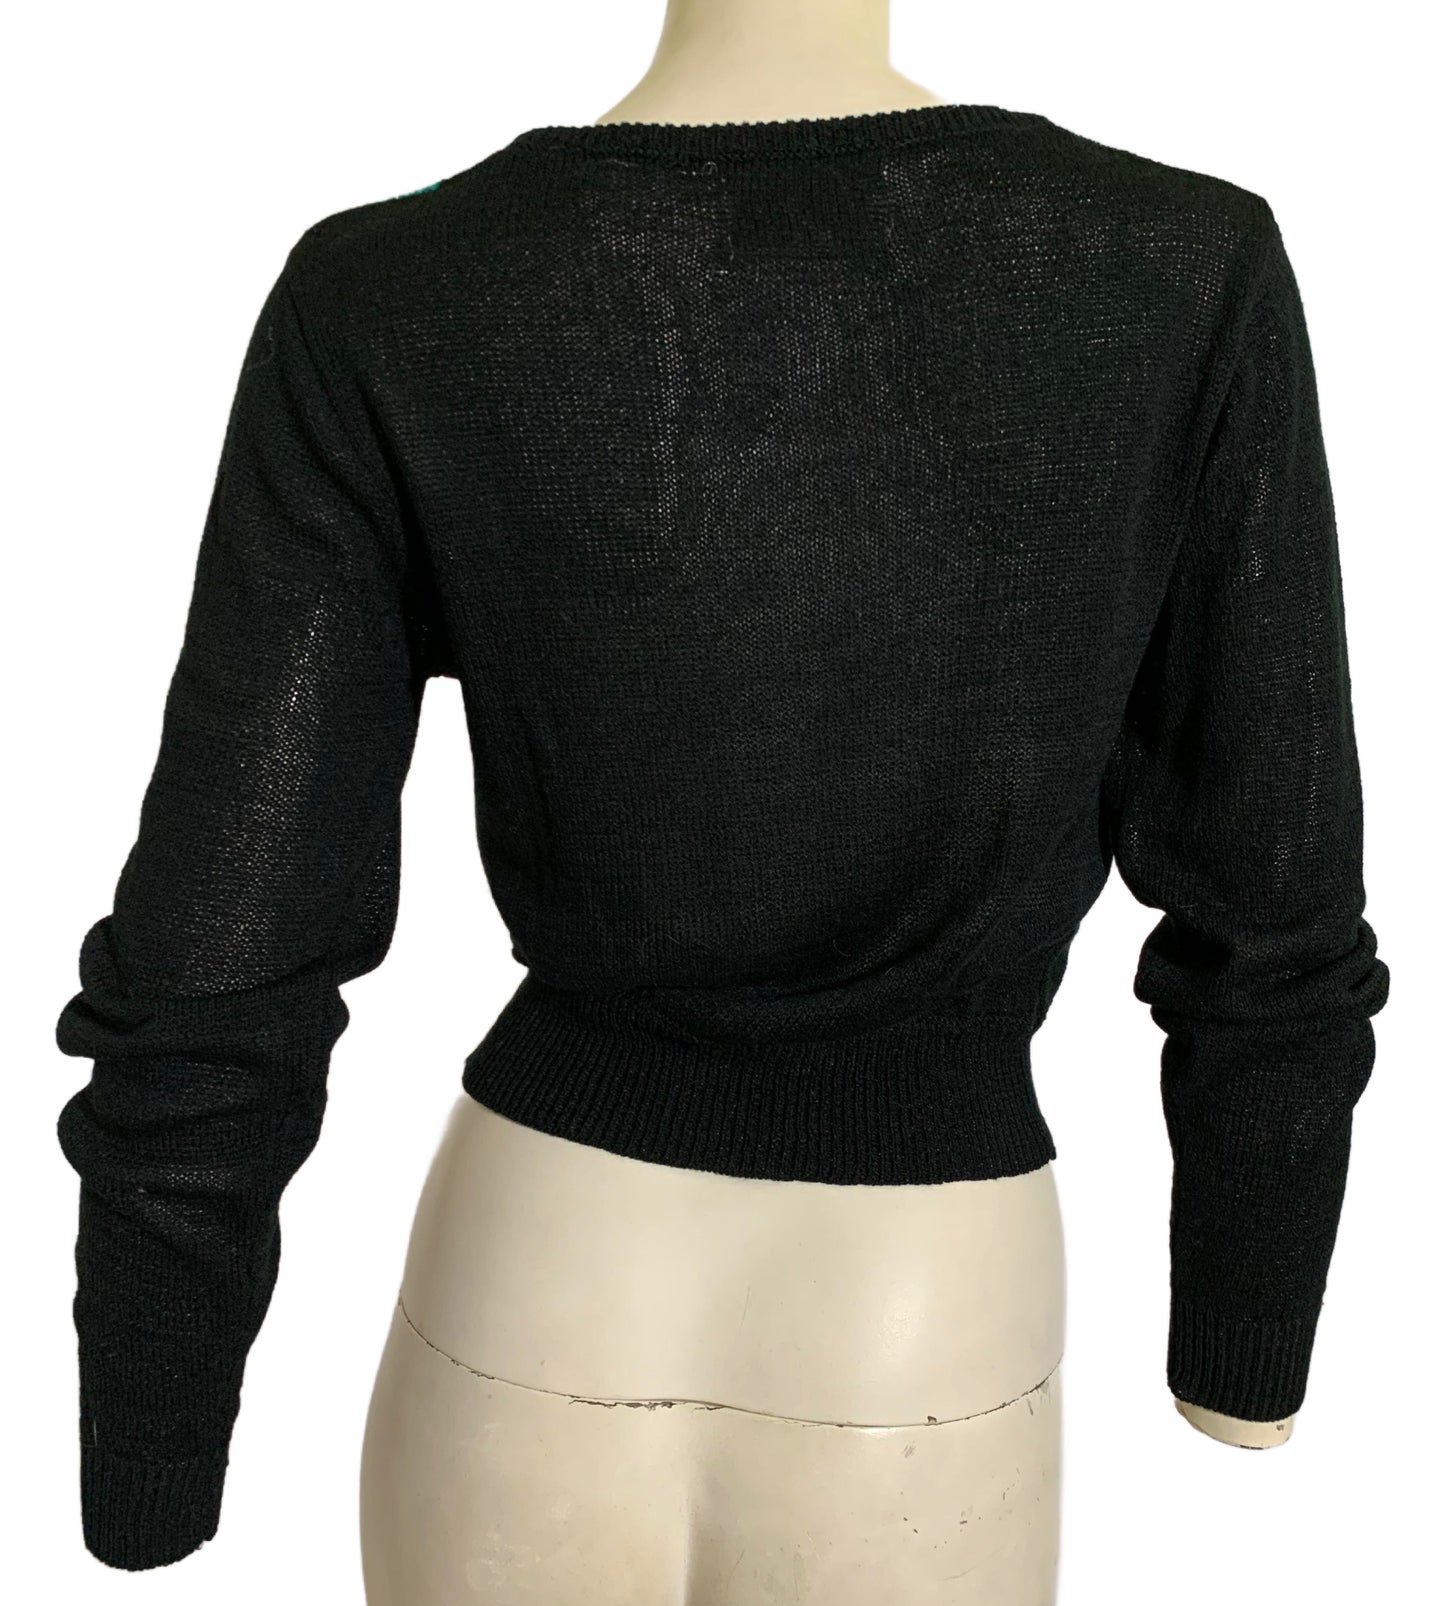 Slinky Black Long Sleeved Rayon Sweater with Metallic Disco Accents circa 1970s